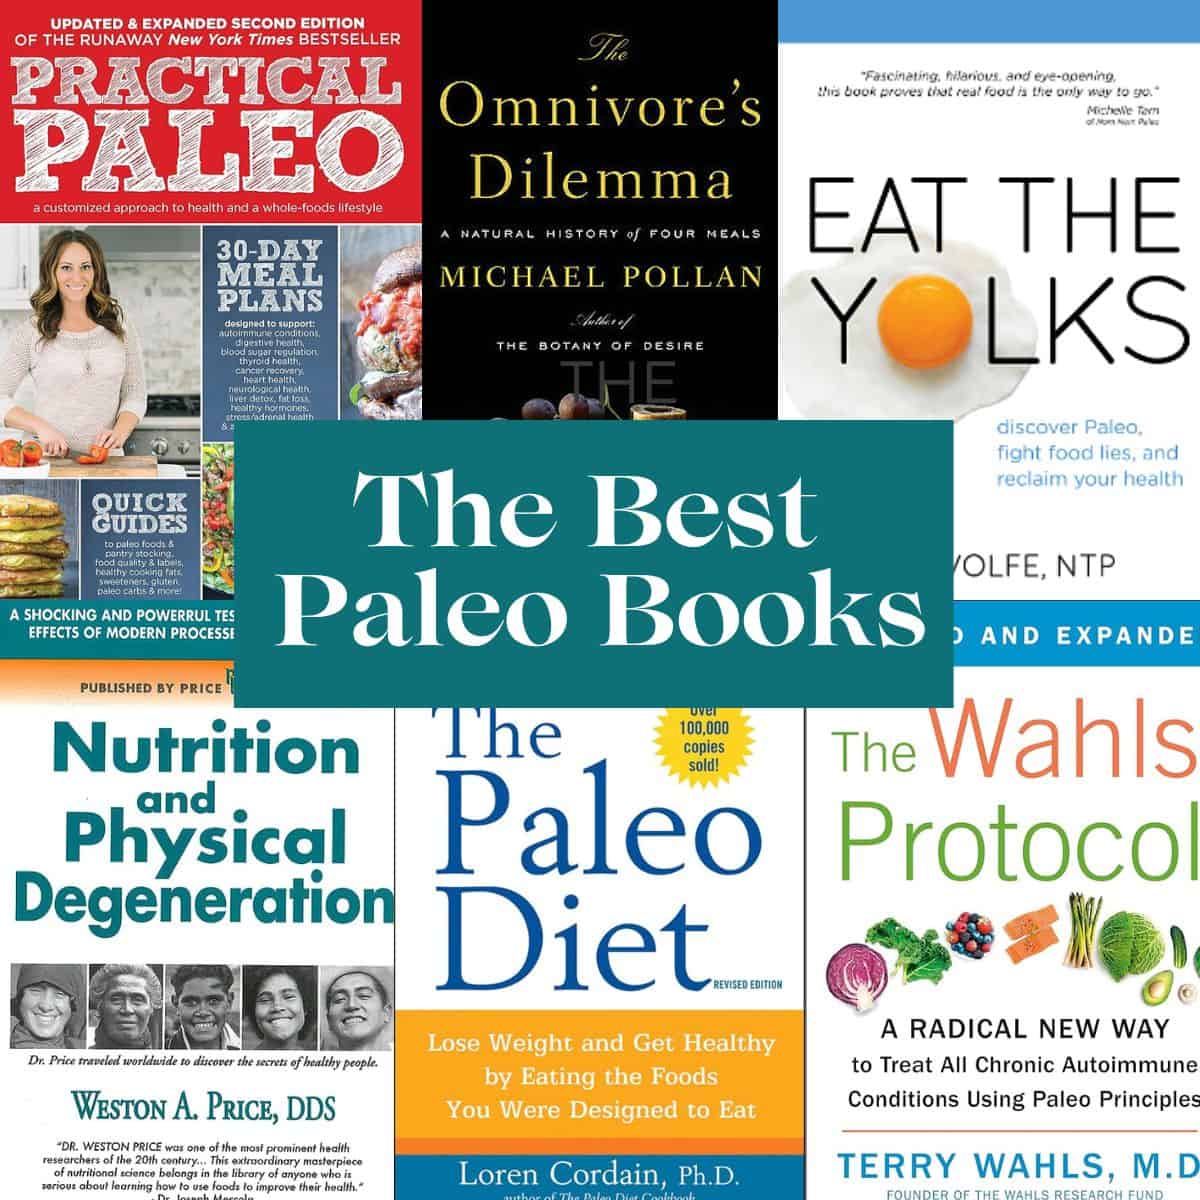 A collage of different books with the title "The Best Paleo Books" over them.